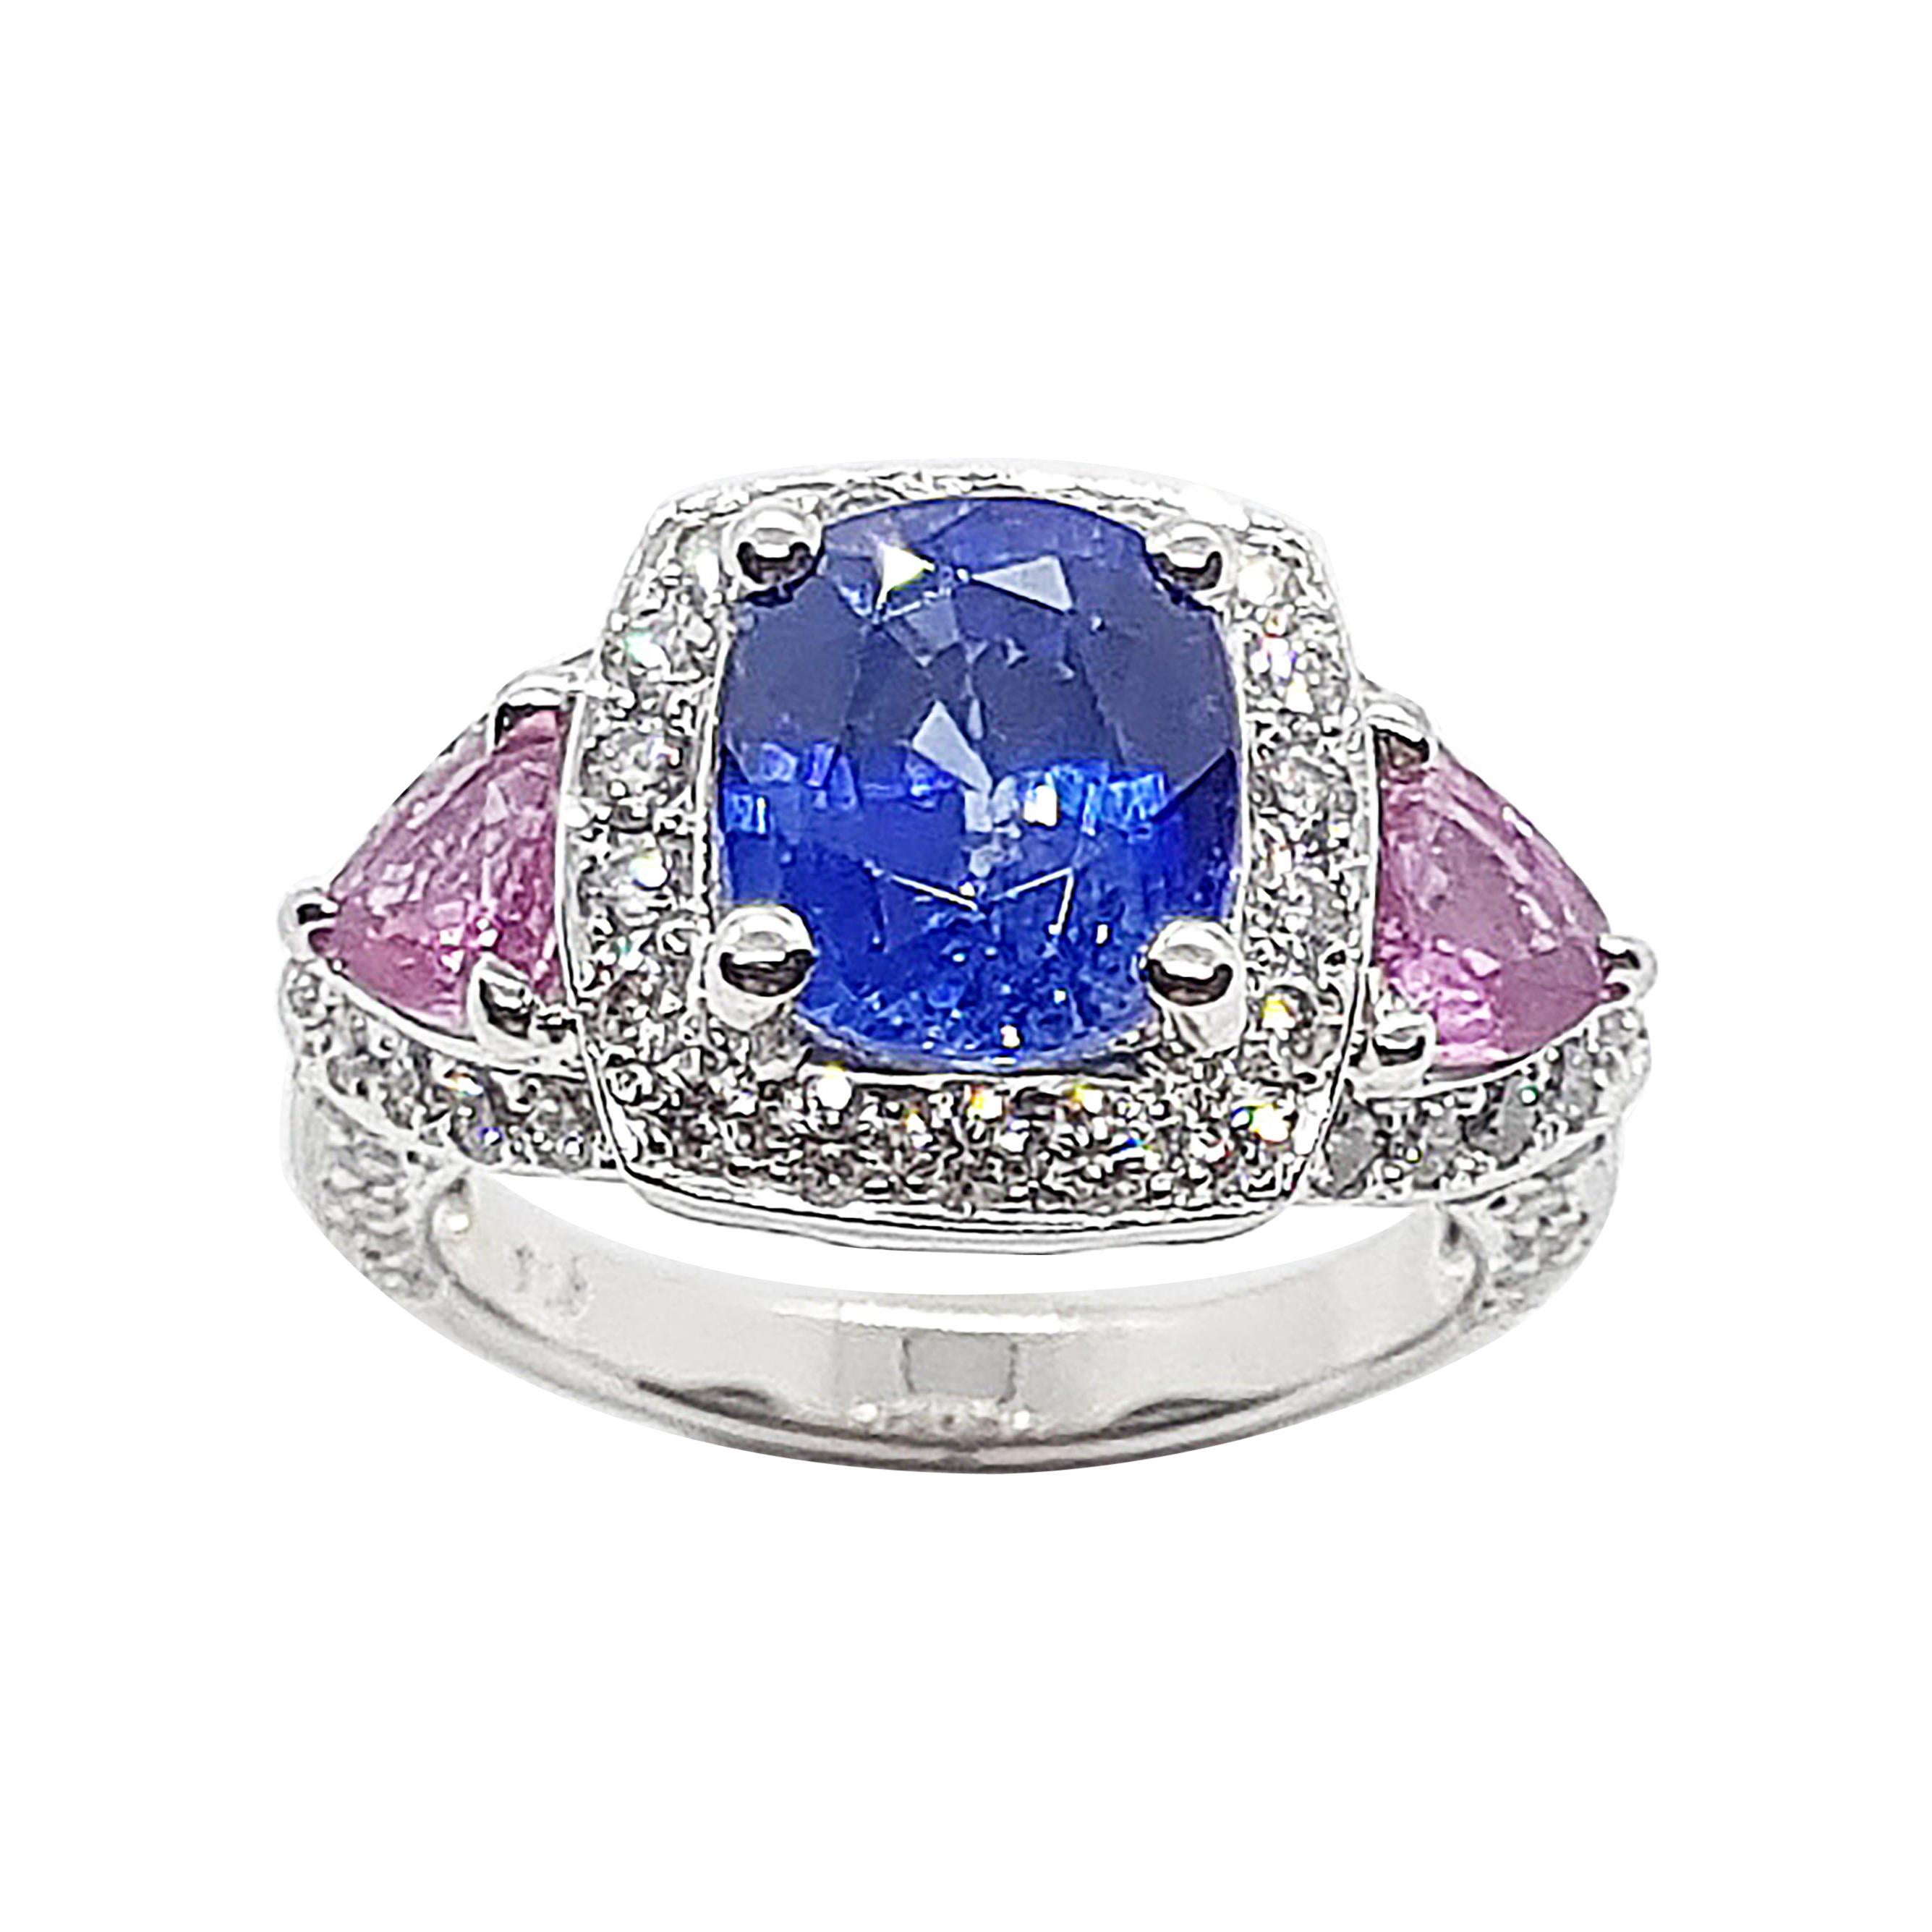 What is a pink stone in a ring?